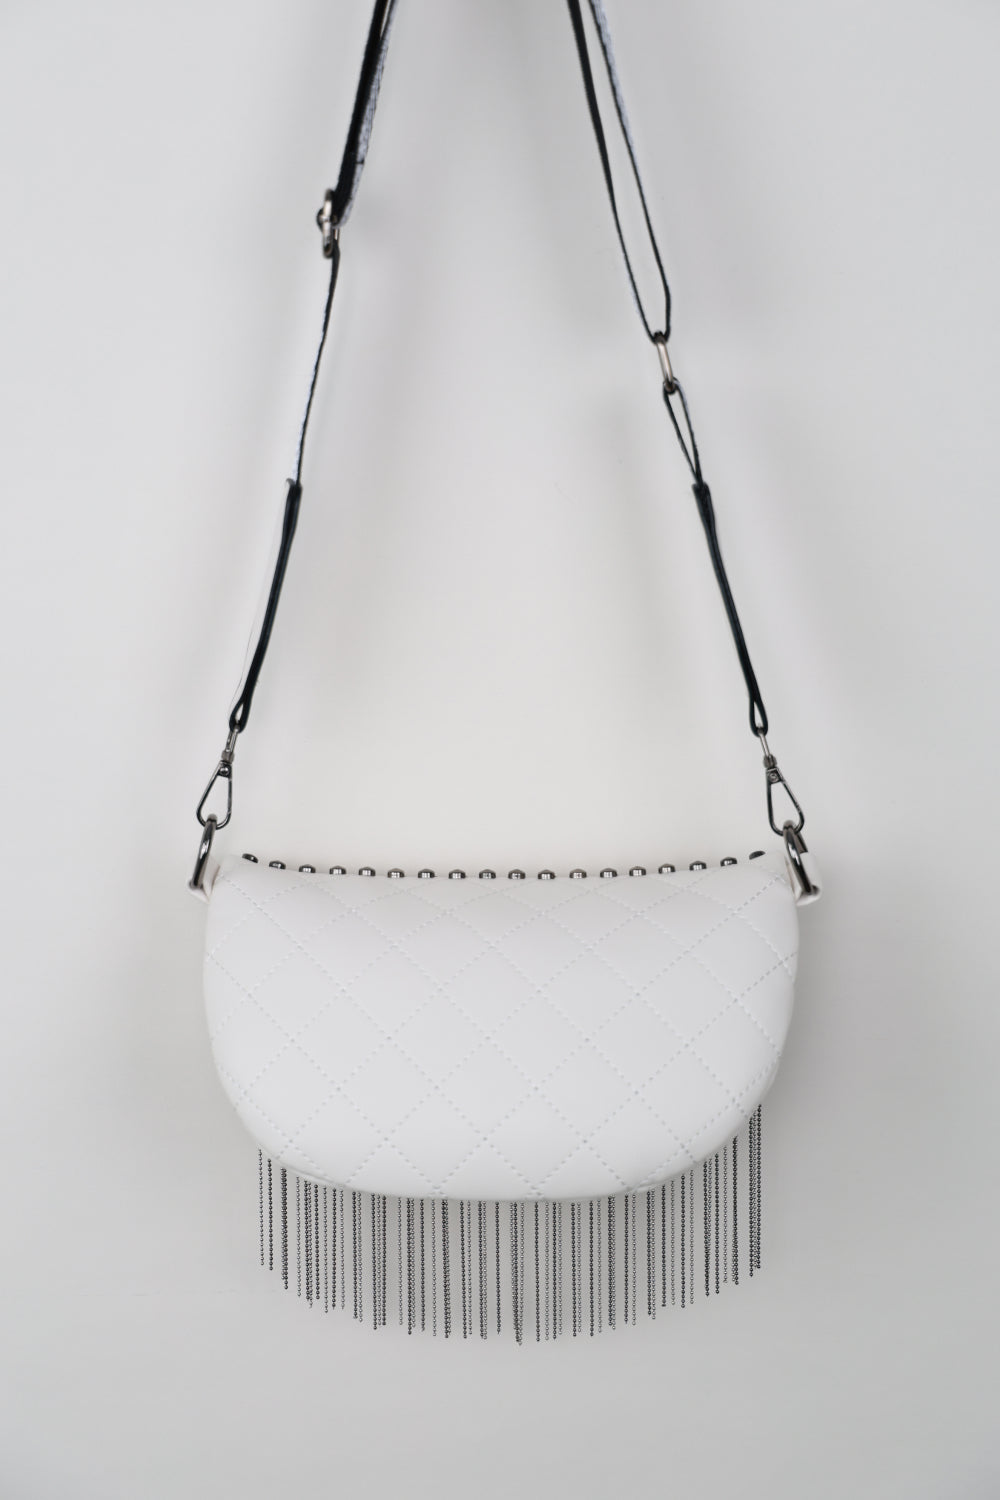 PU Leather Studded Sling Bag with Fringes